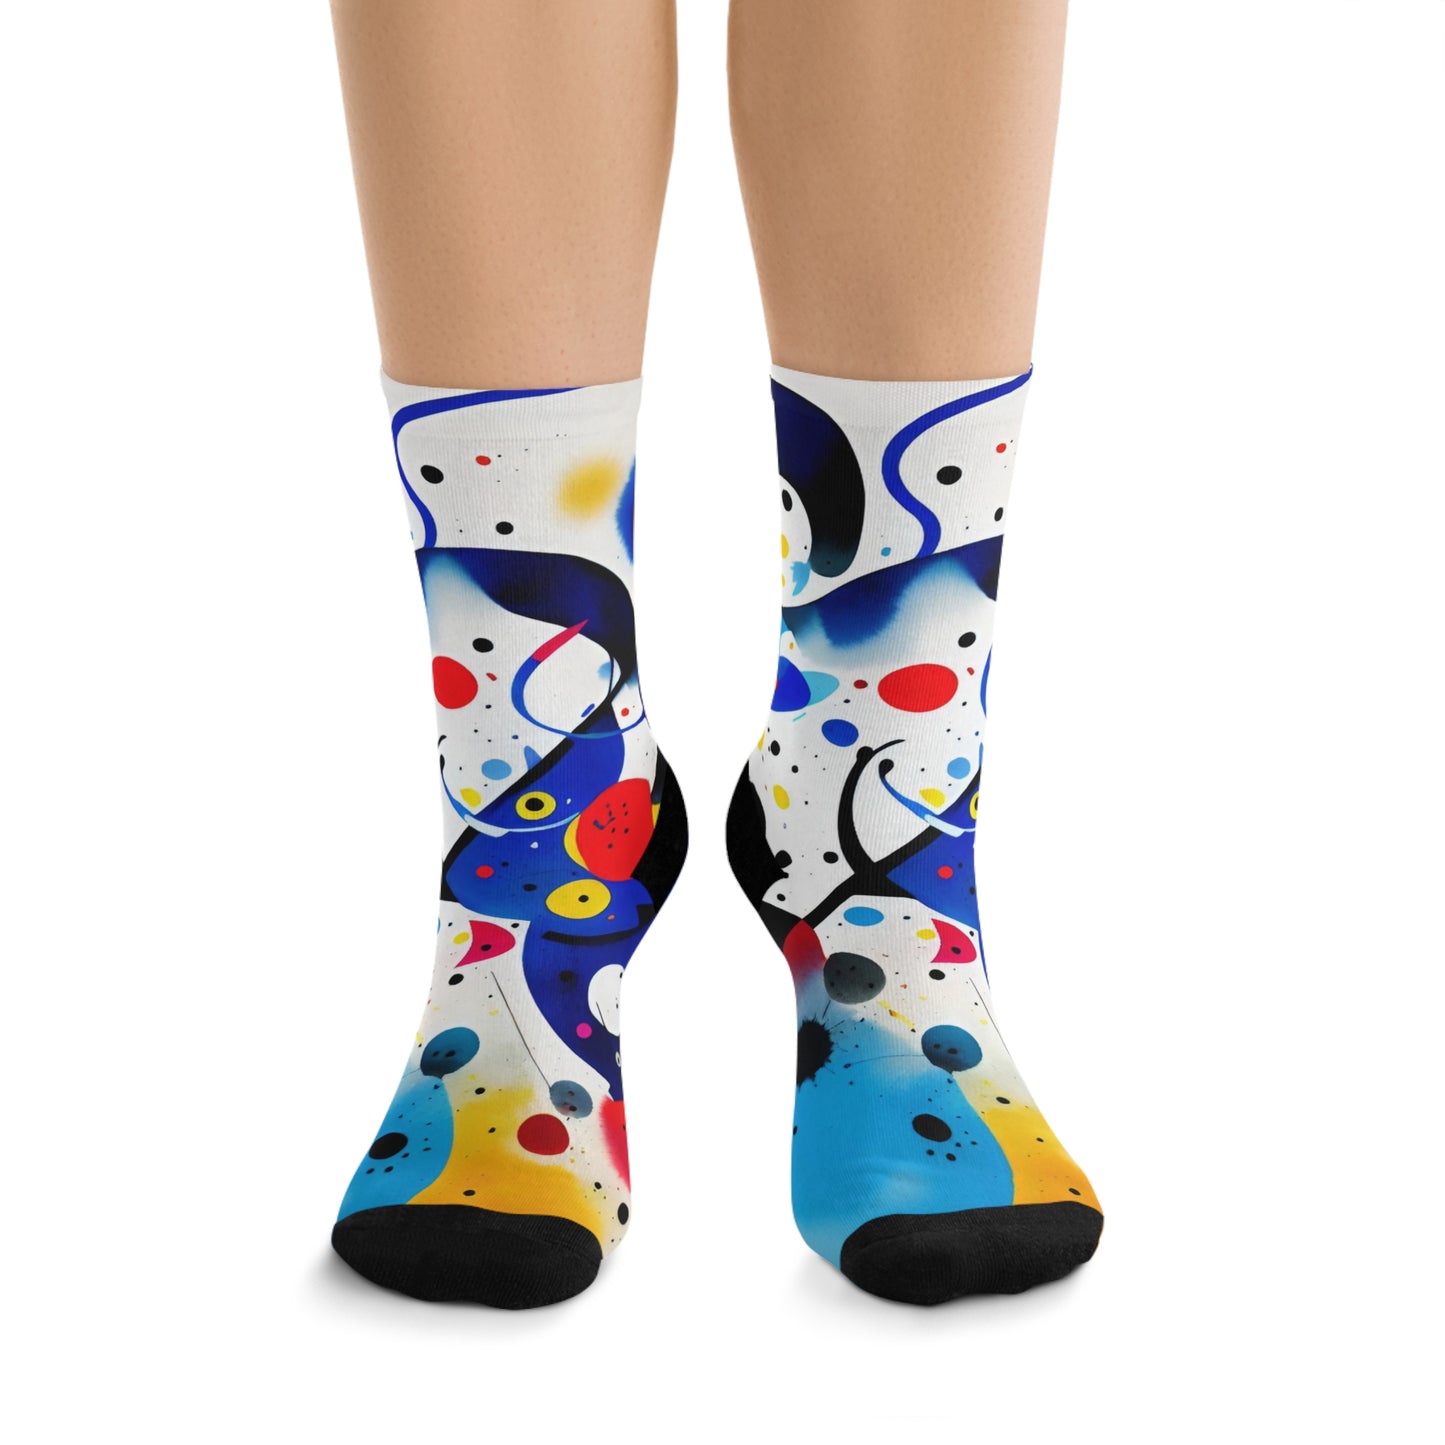 Recycled Poly Socks, Inspired by Miro